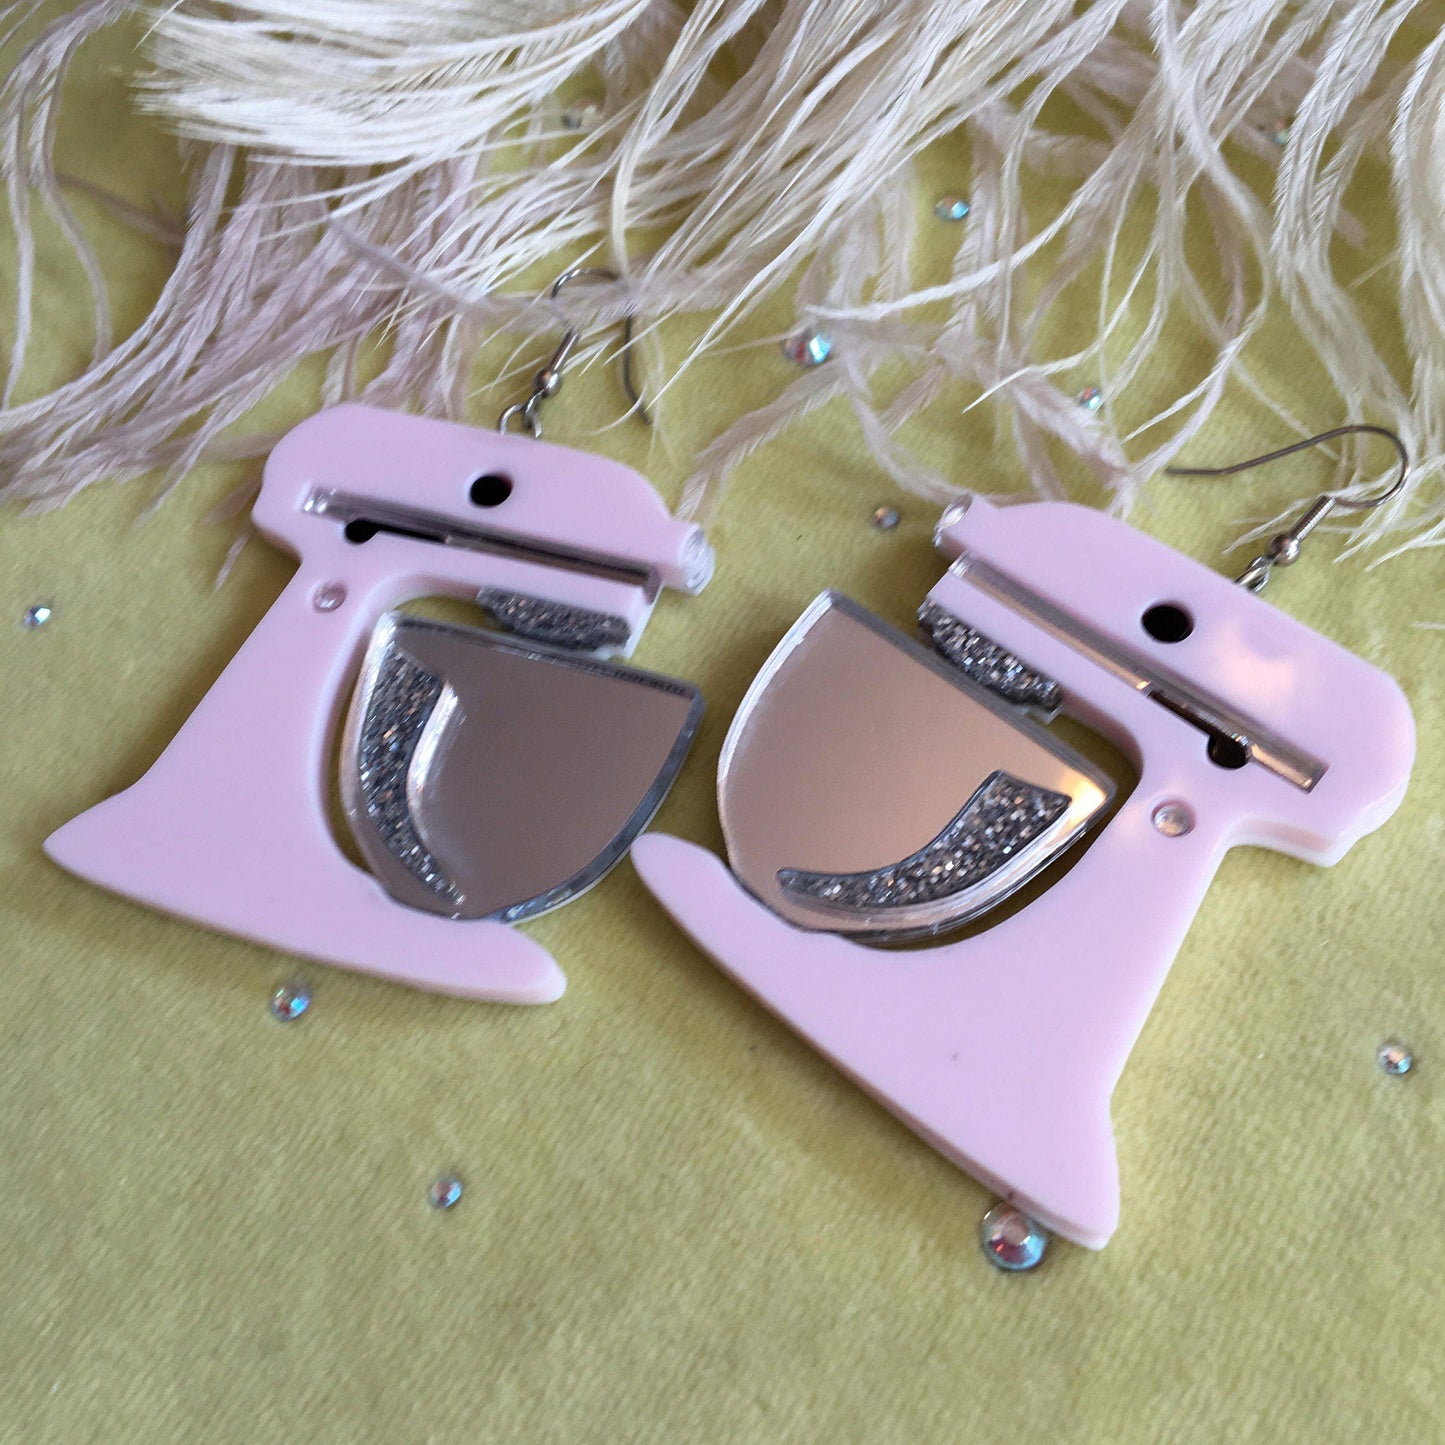 I'm Your Present - Kitchenaid Mixer Earrings, Plastic Jewelry, Laser Cut Acrylic